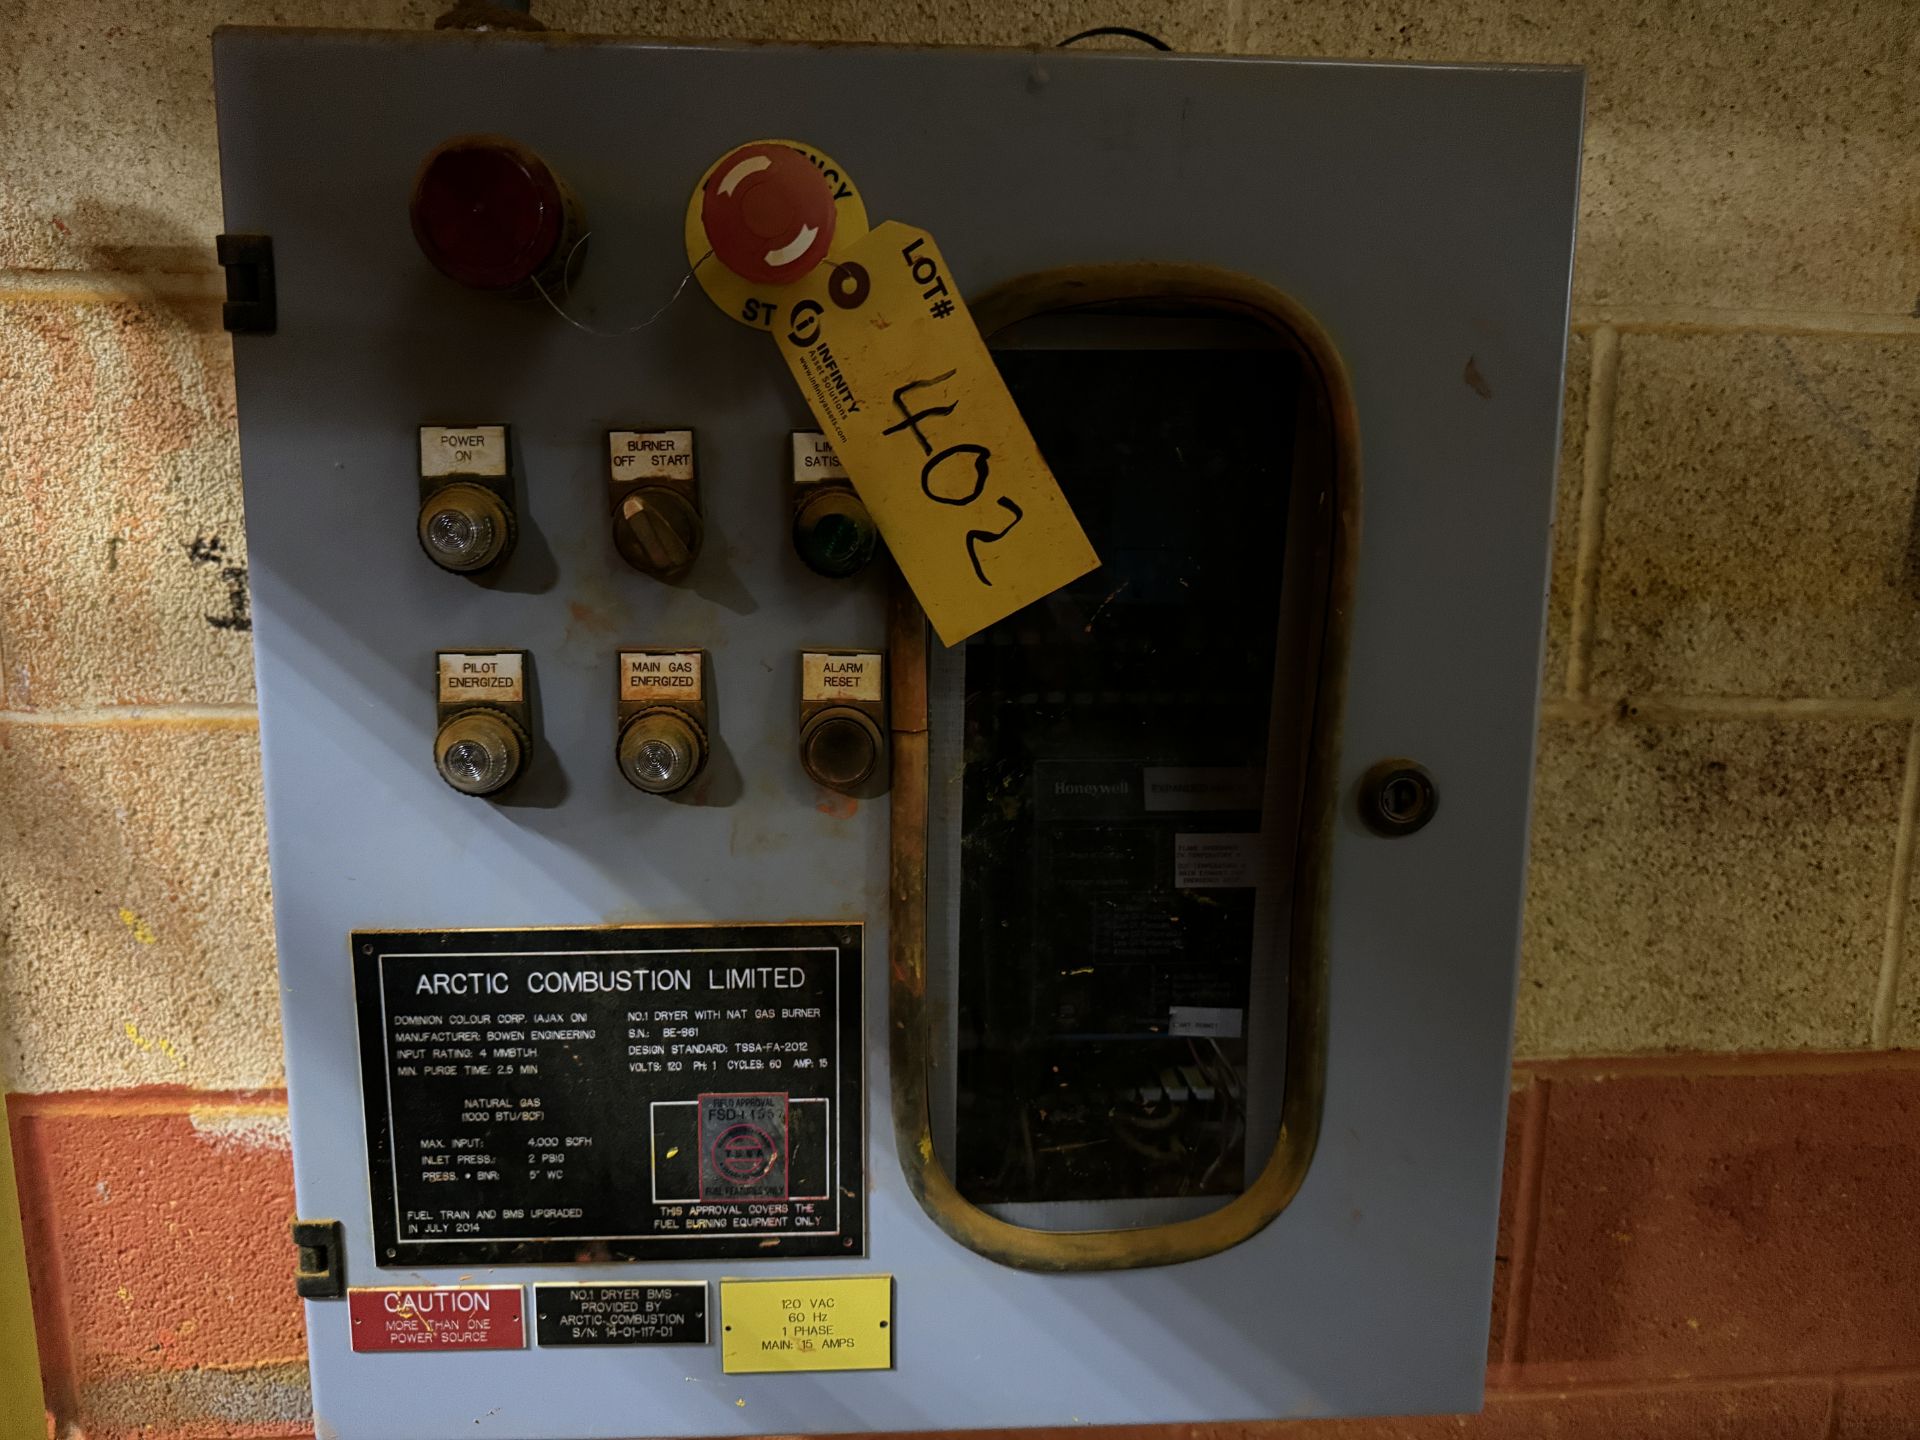 LOT OF (2) ARCTIC COMBUTION LTD CONTROL PANELS W/ HONEYWELL BURMIER CONTROL AND EXPANDED ANNUMCIATOR - Image 3 of 5